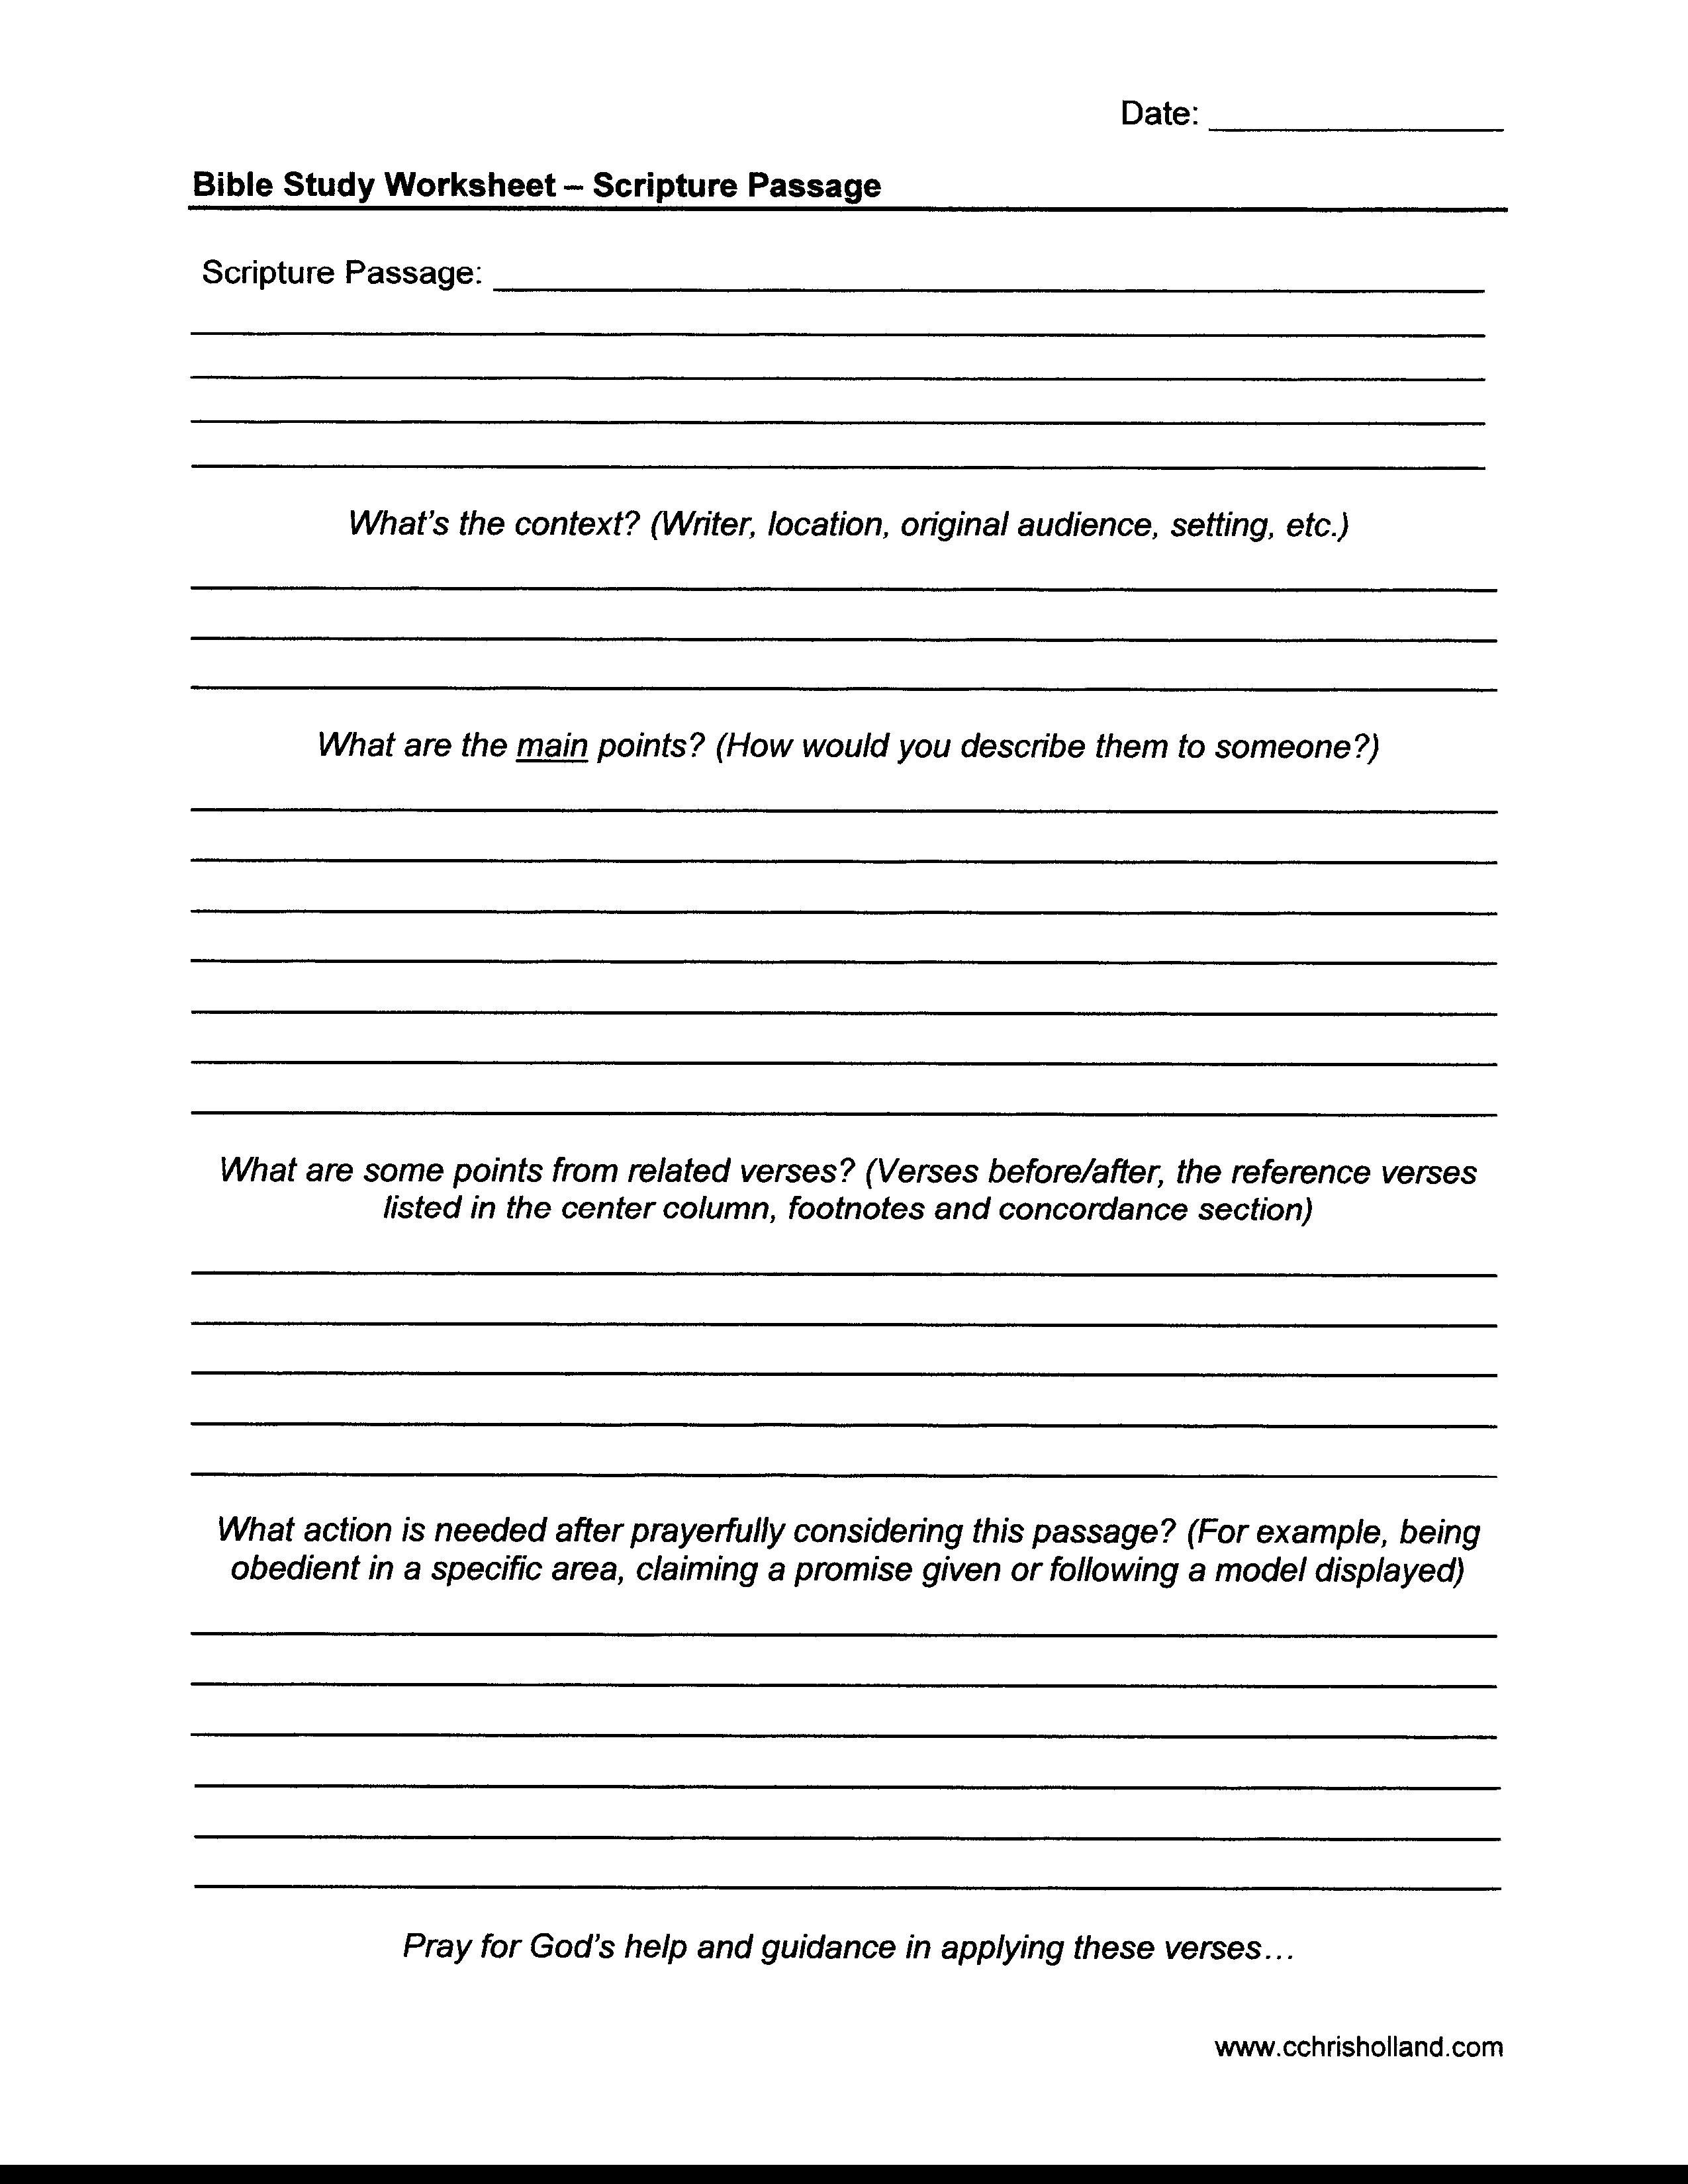 Free Printable Bible Study Worksheets (82+ Images In Collection) Page 3 - Free Printable Bible Studies For Women